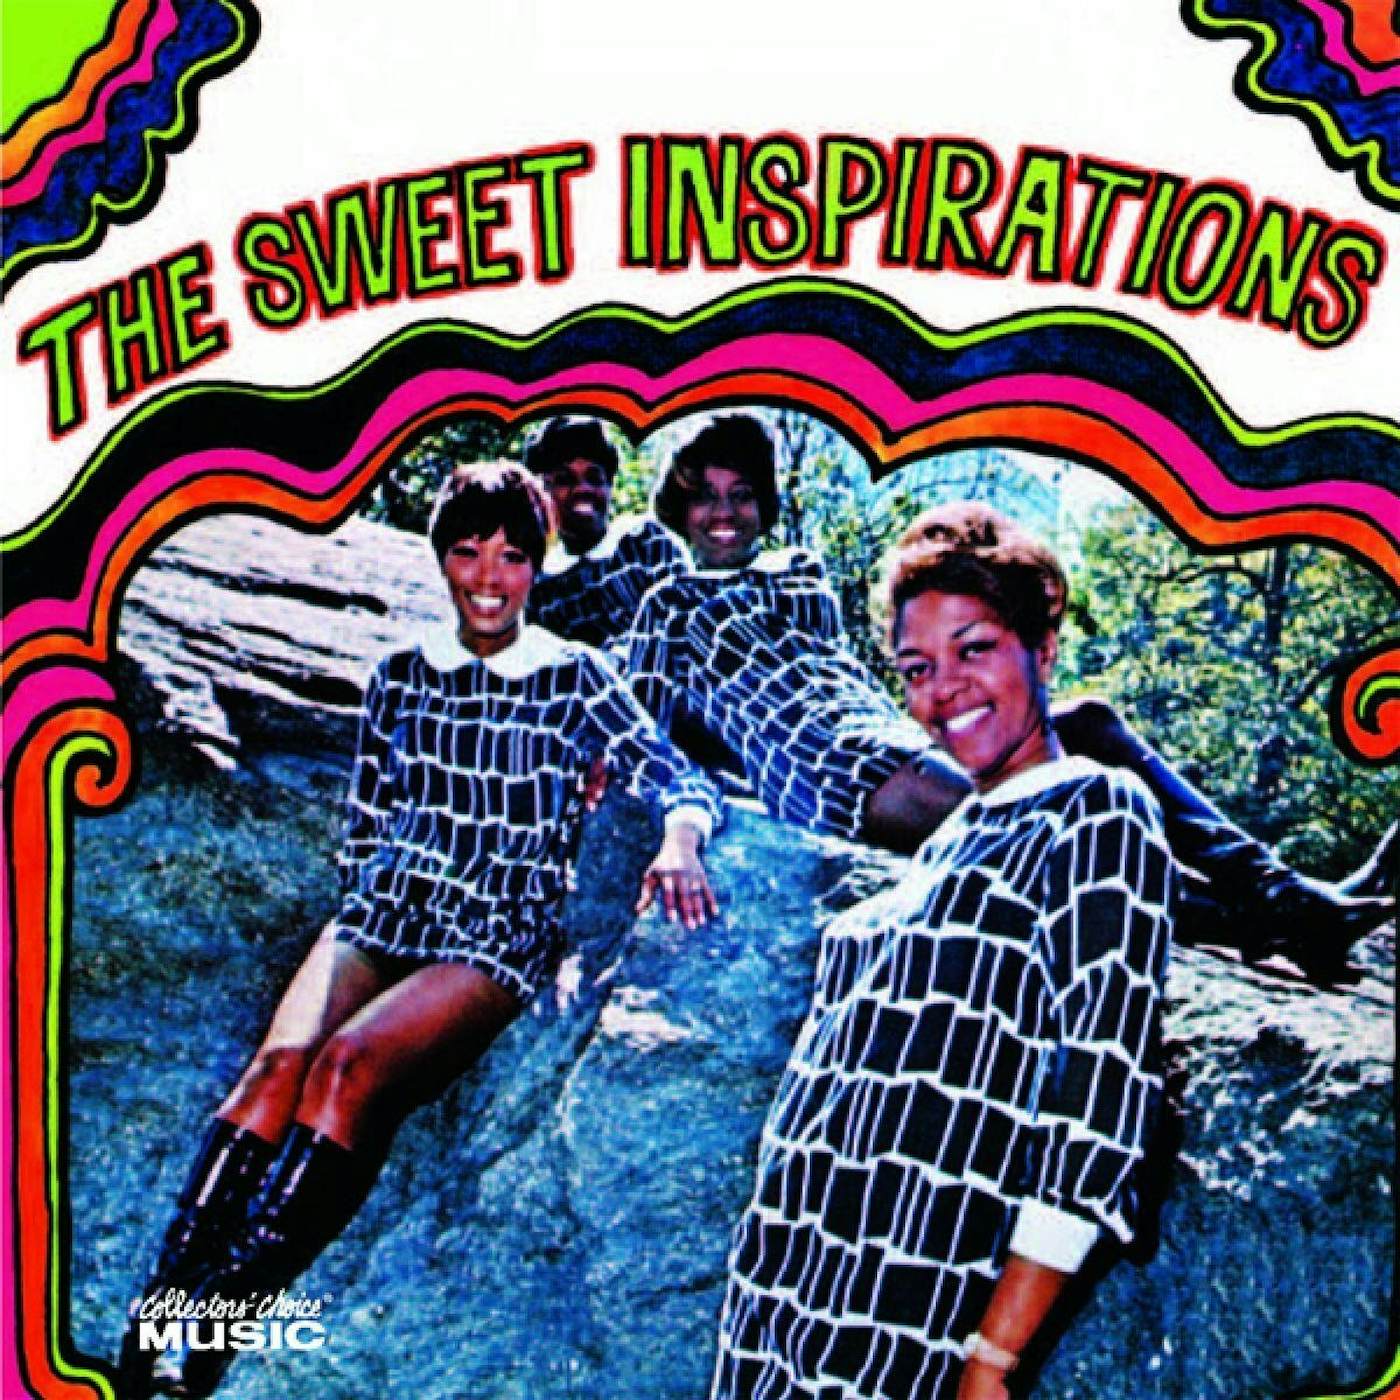 The Sweet Inspirations CD